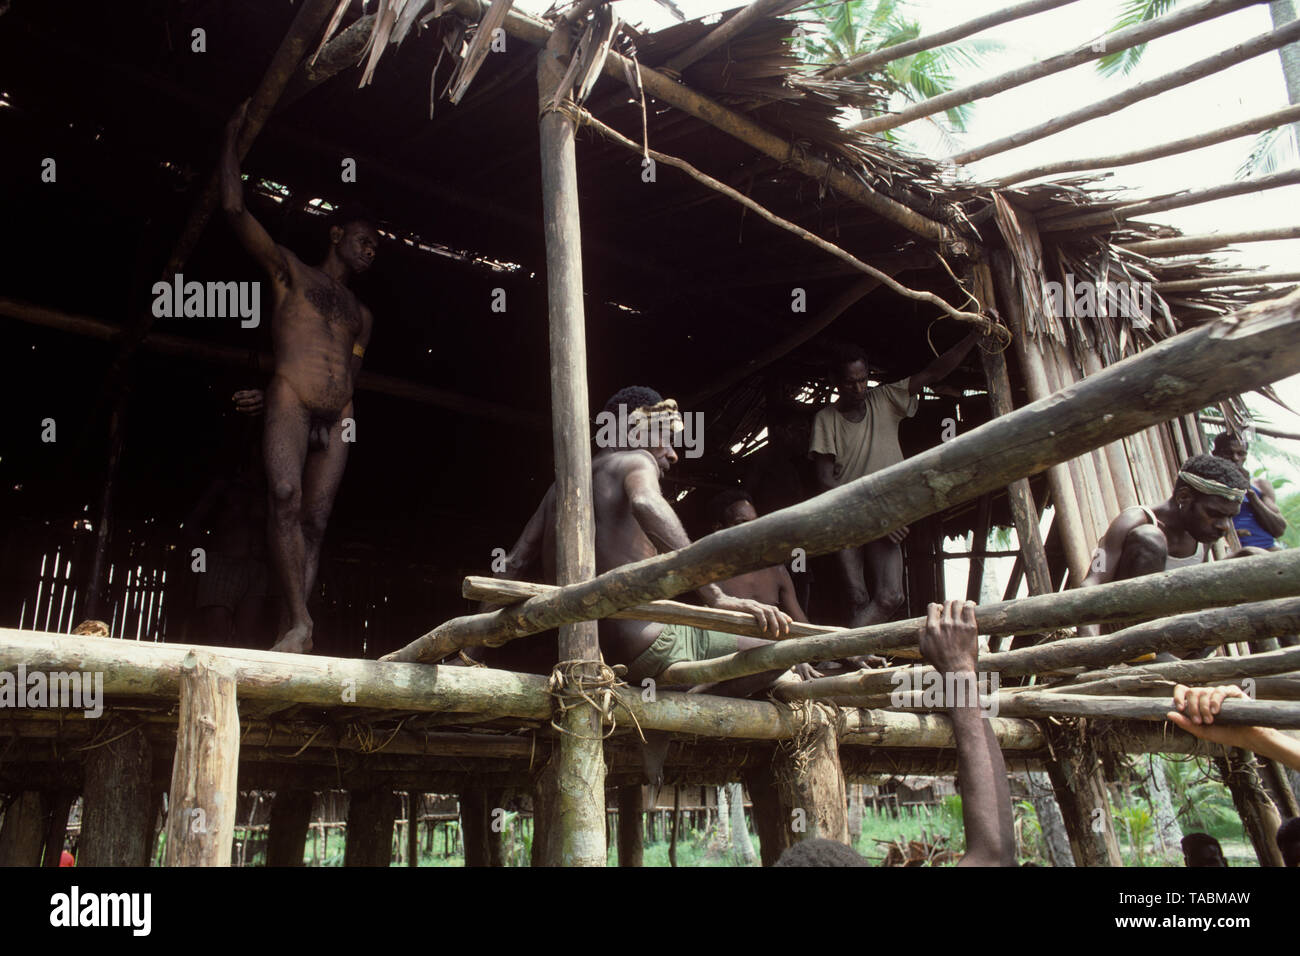 Asmat people: ethnic group living in the Papua province of Indonesia, along the Arafura Sea.  The Long House at Odjanep. Photograph taken by Francois  Stock Photo